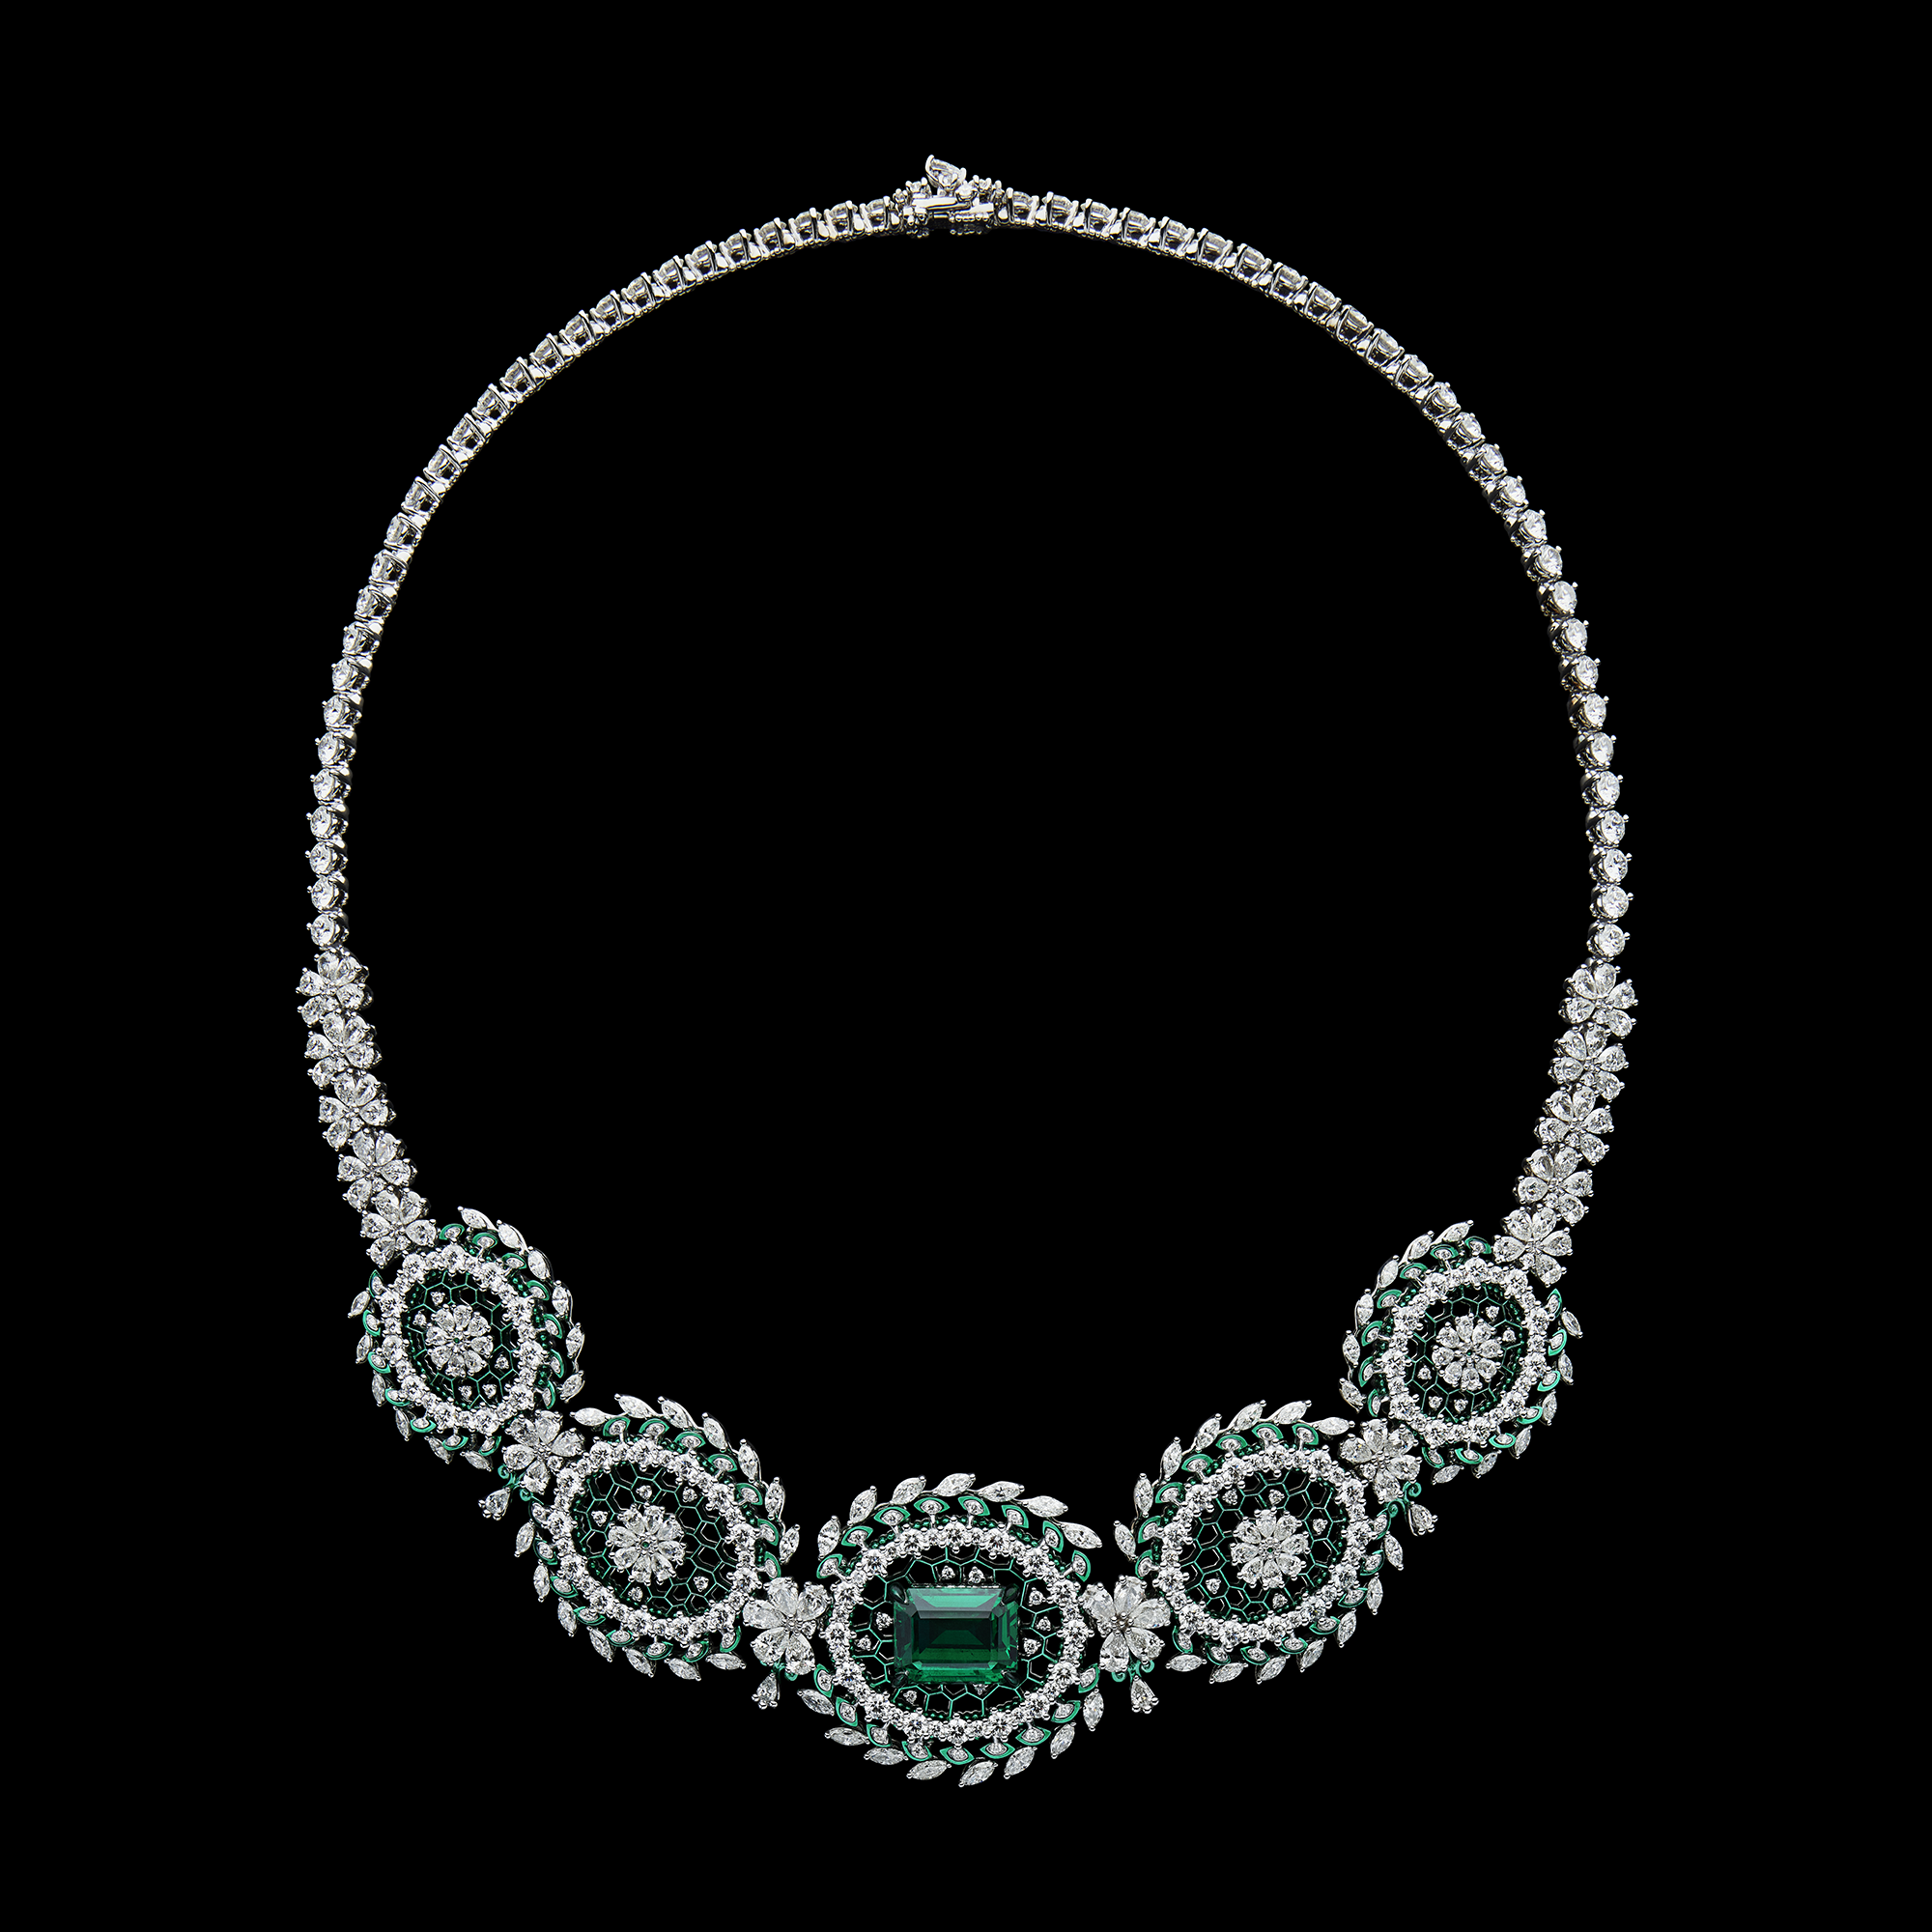 Dior unveils new high jewellery collection